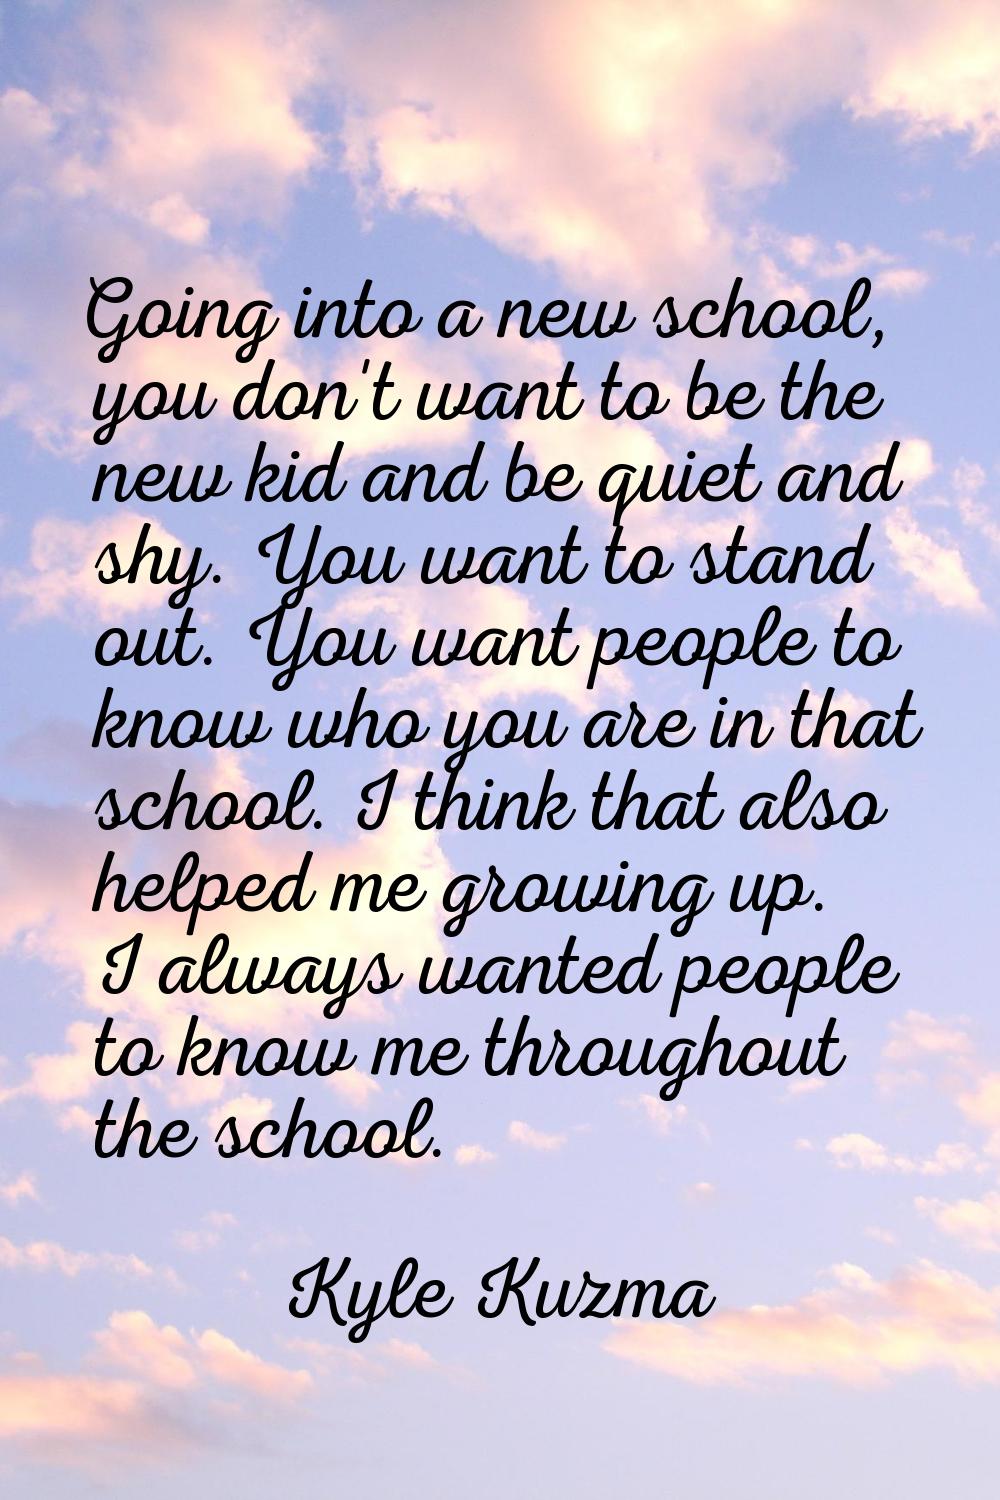 Going into a new school, you don't want to be the new kid and be quiet and shy. You want to stand o